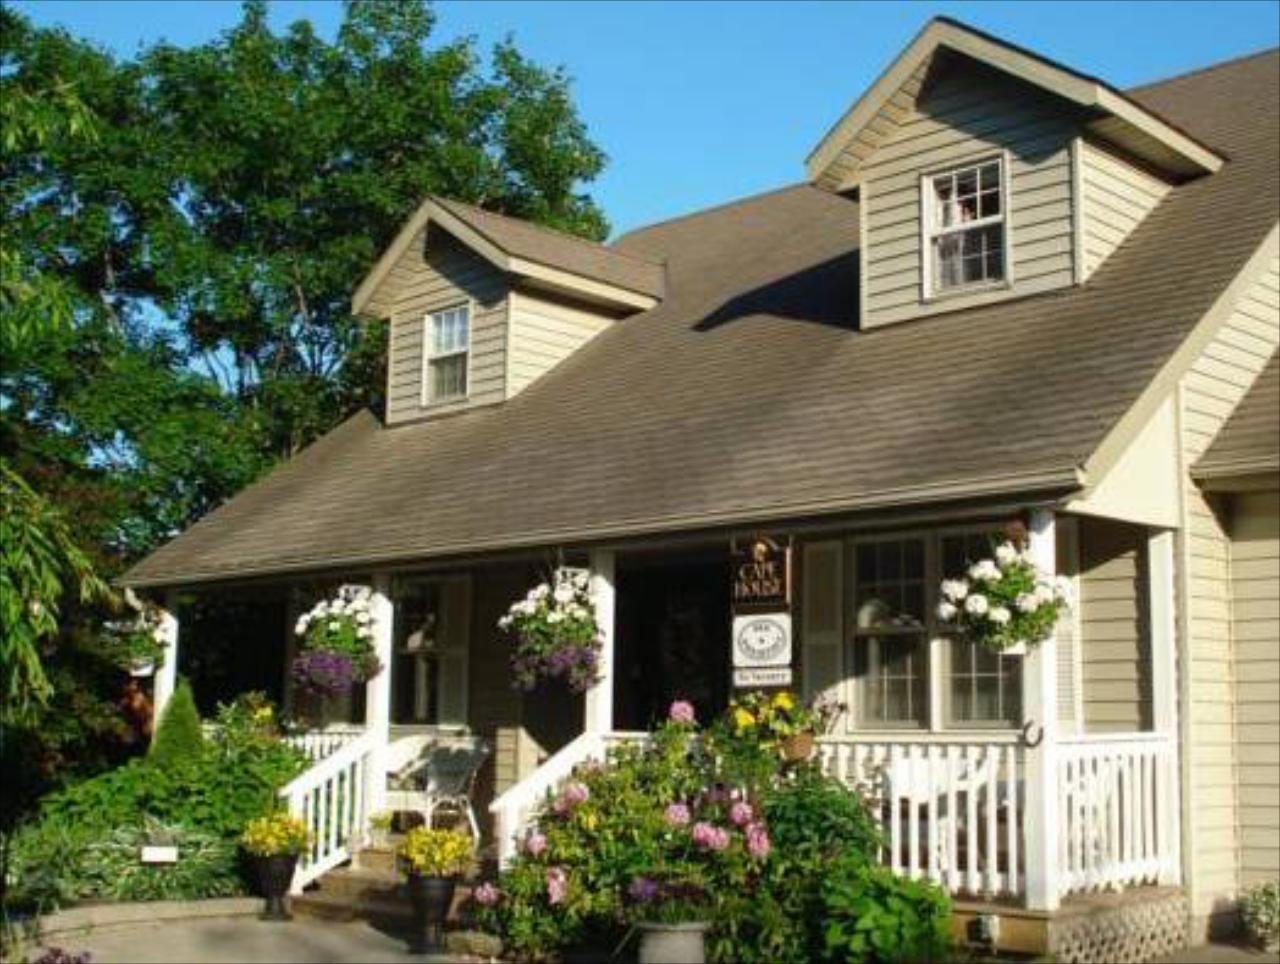 Cape House Bed And Breakfast